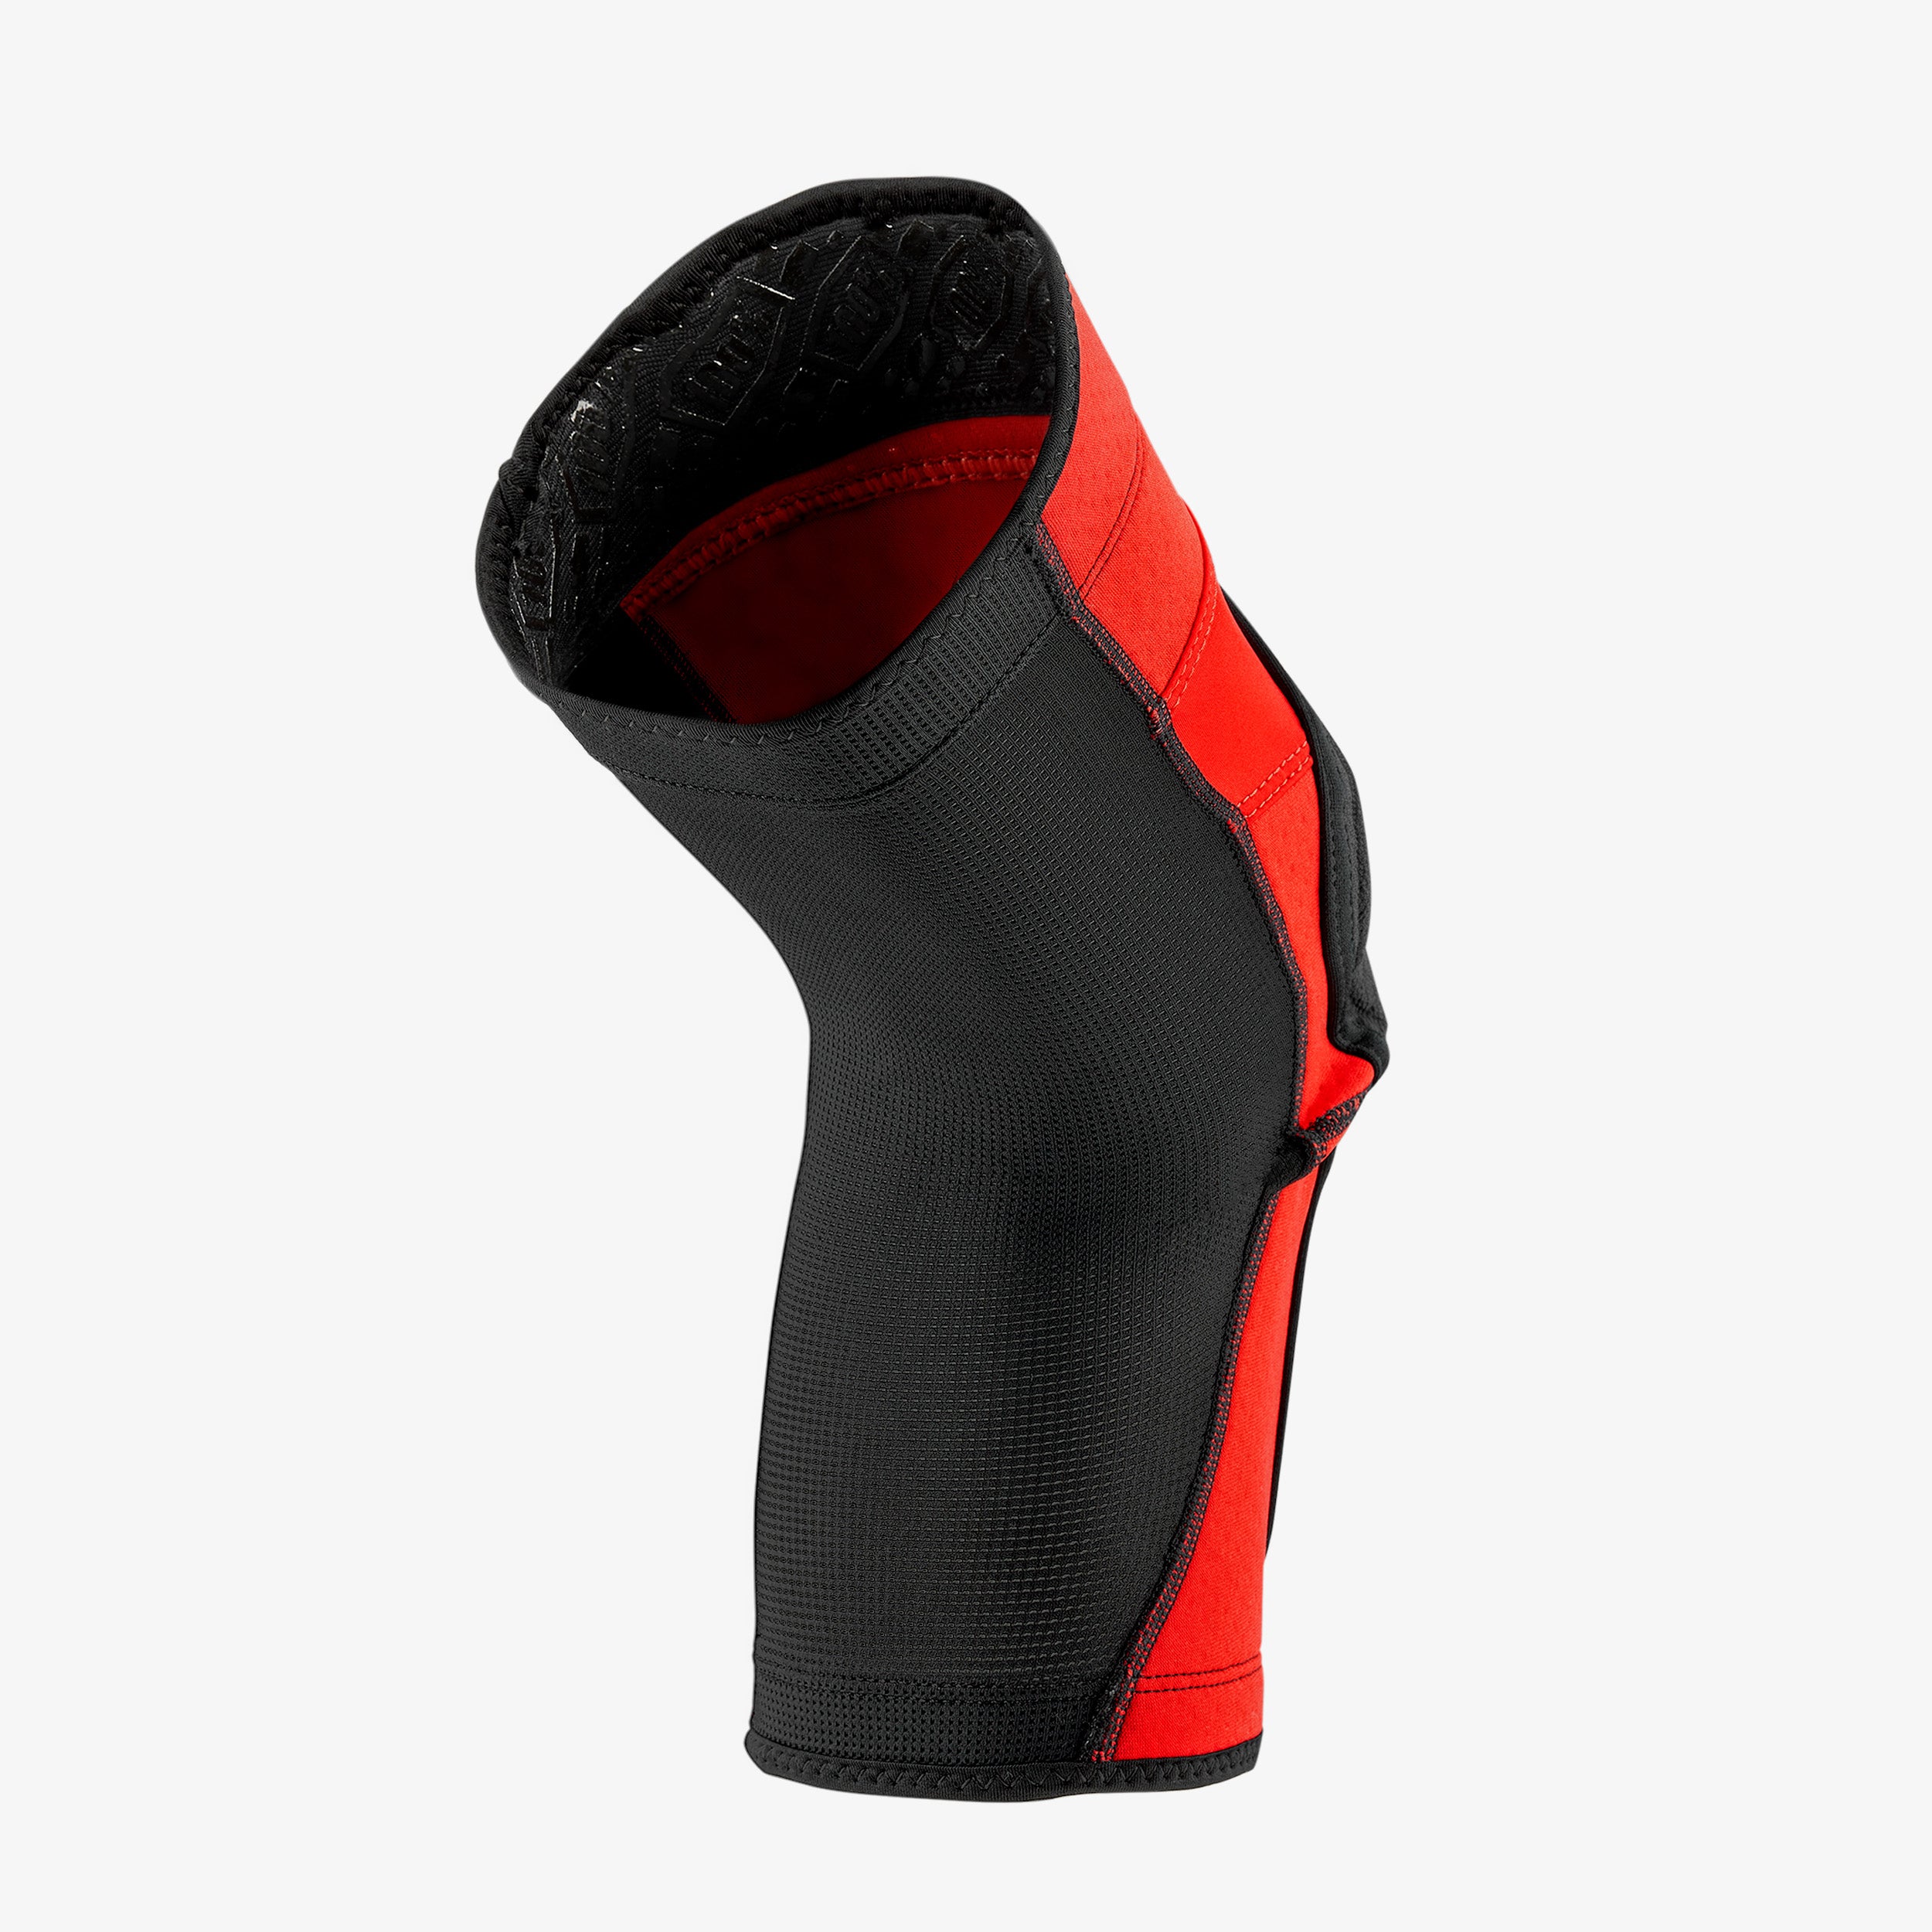 RIDECAMP Knee Guard - Red/Black - Secondary